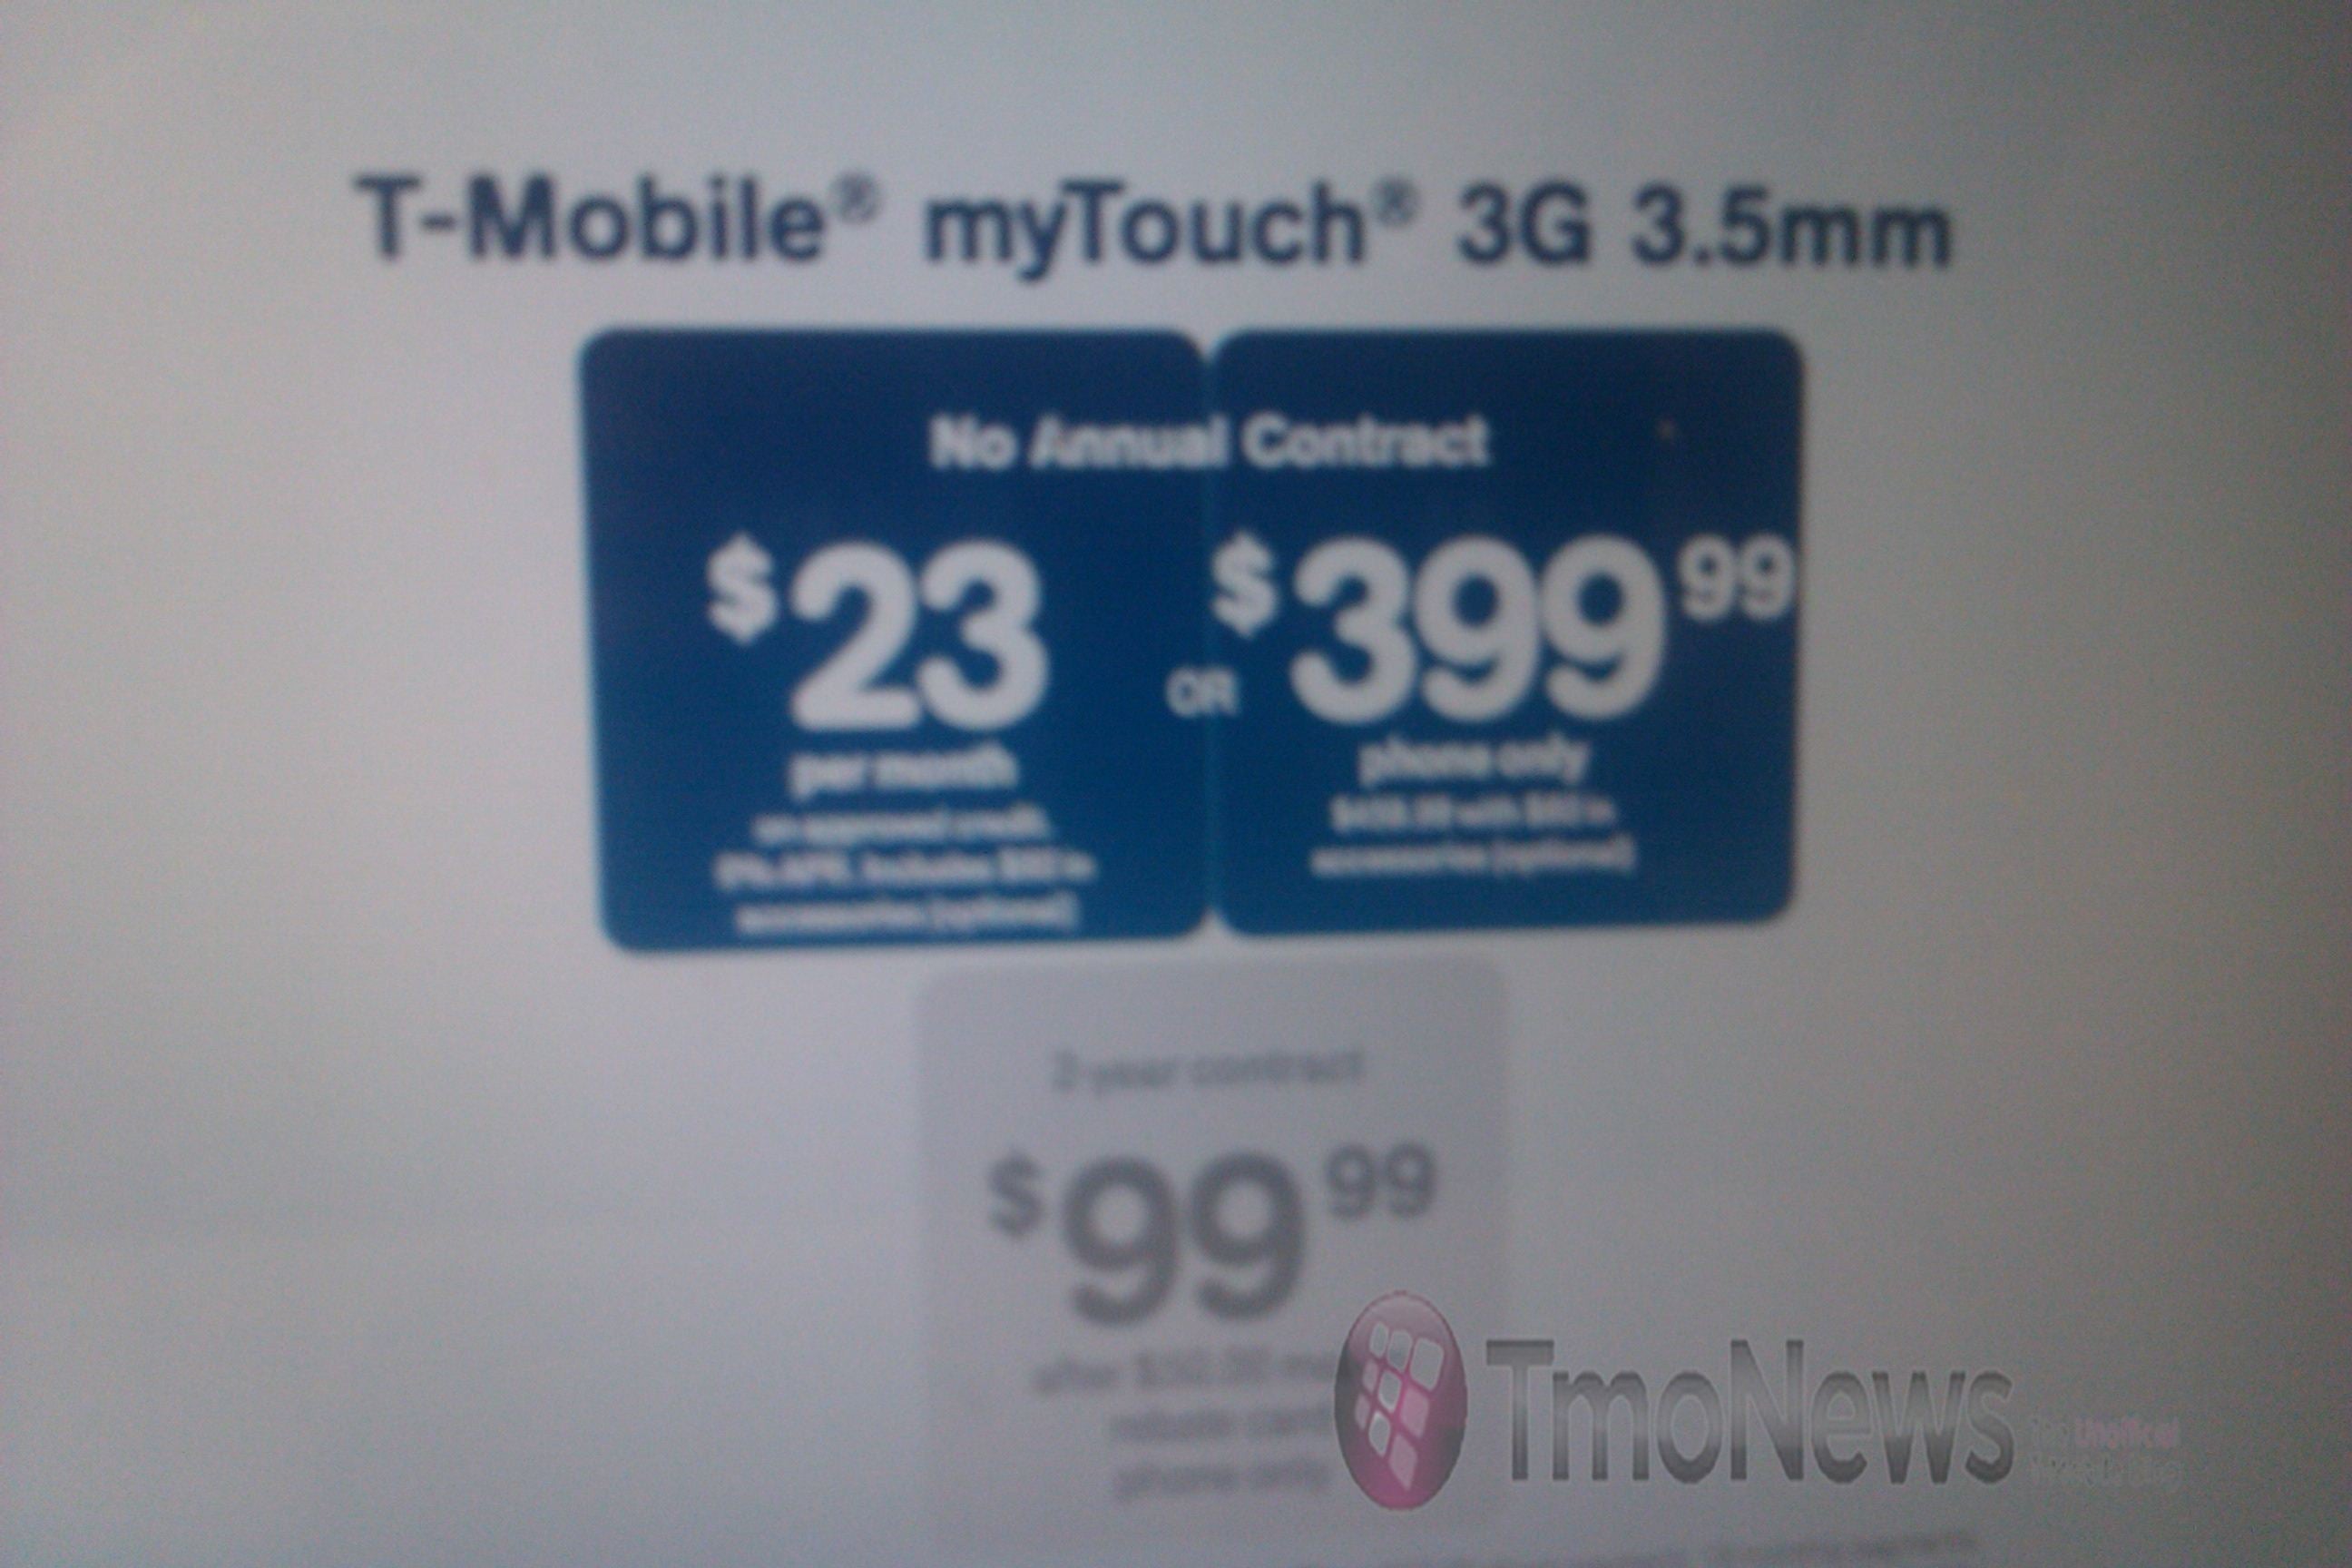 T-Mobile slashes prices on the Samsung Behold II &amp; T-Mobile myTouch 3G